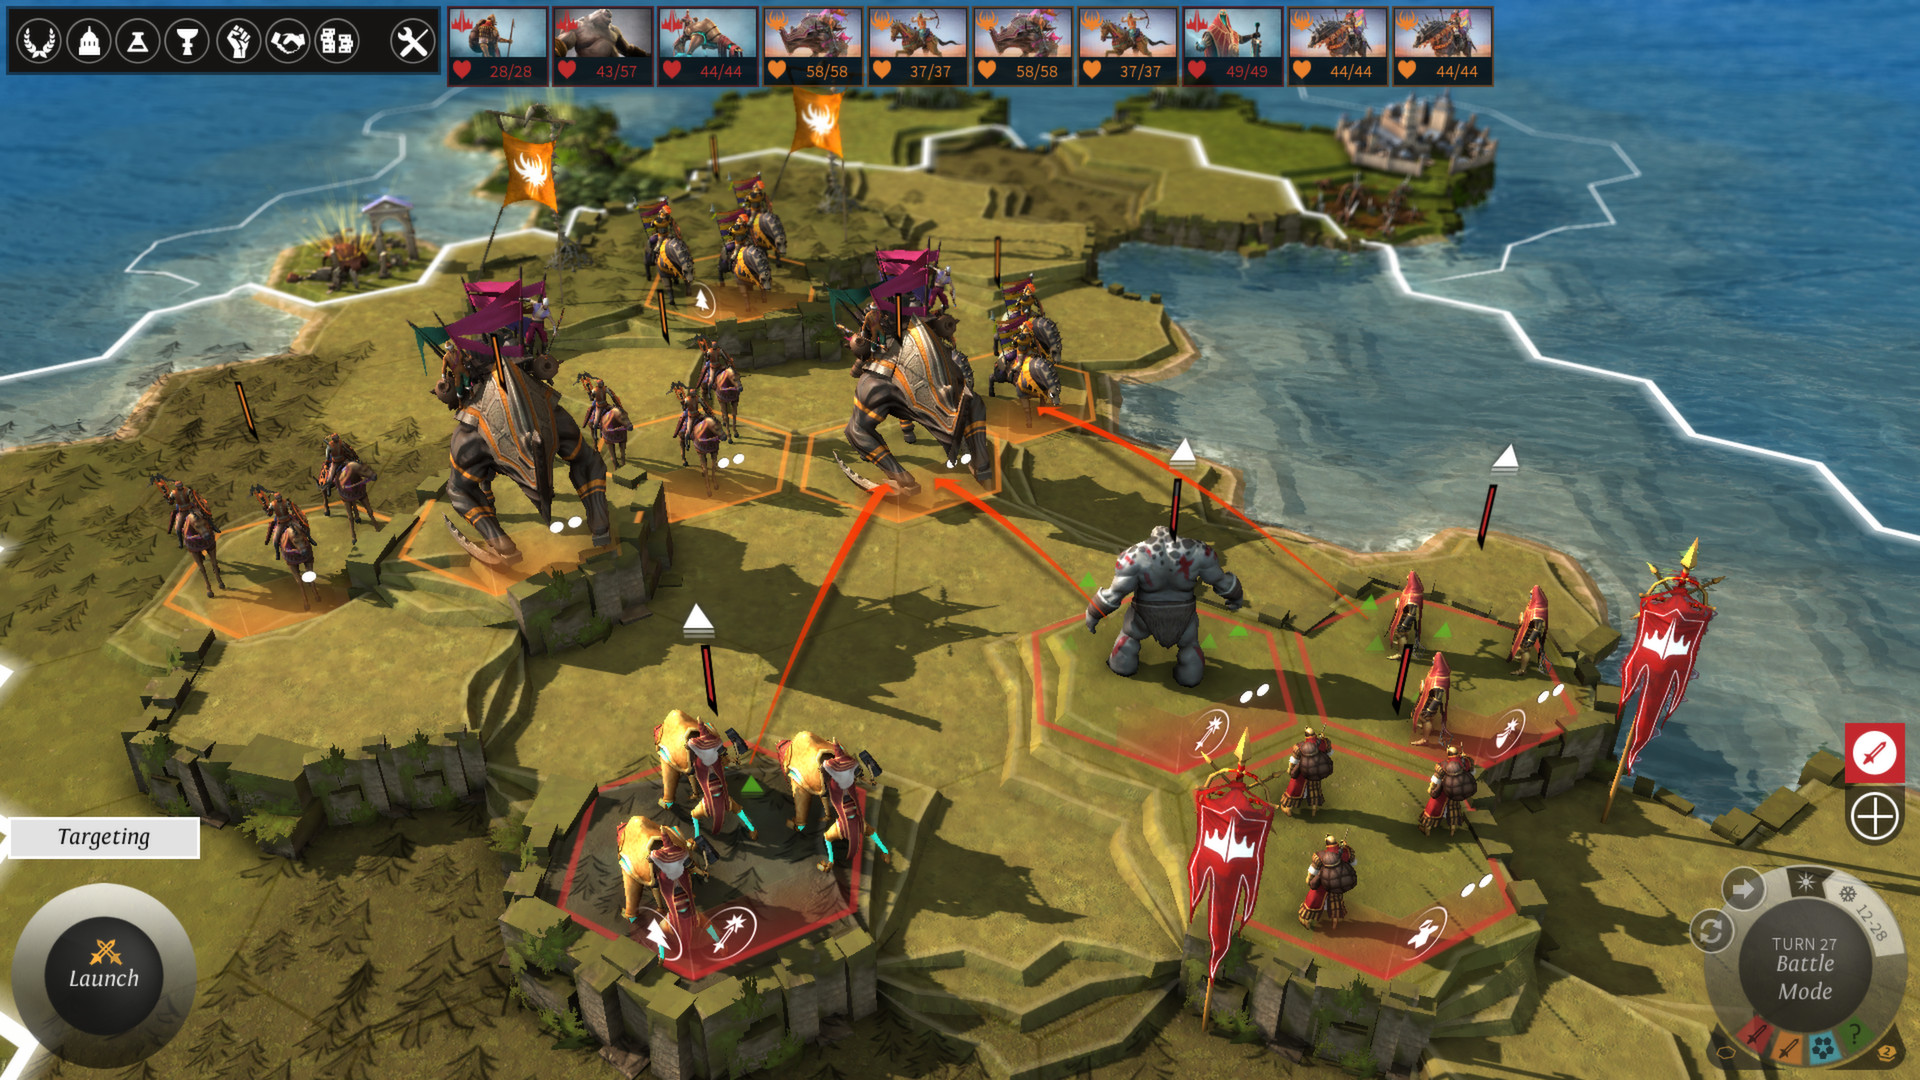 Download Endless Legend free on Steam this week